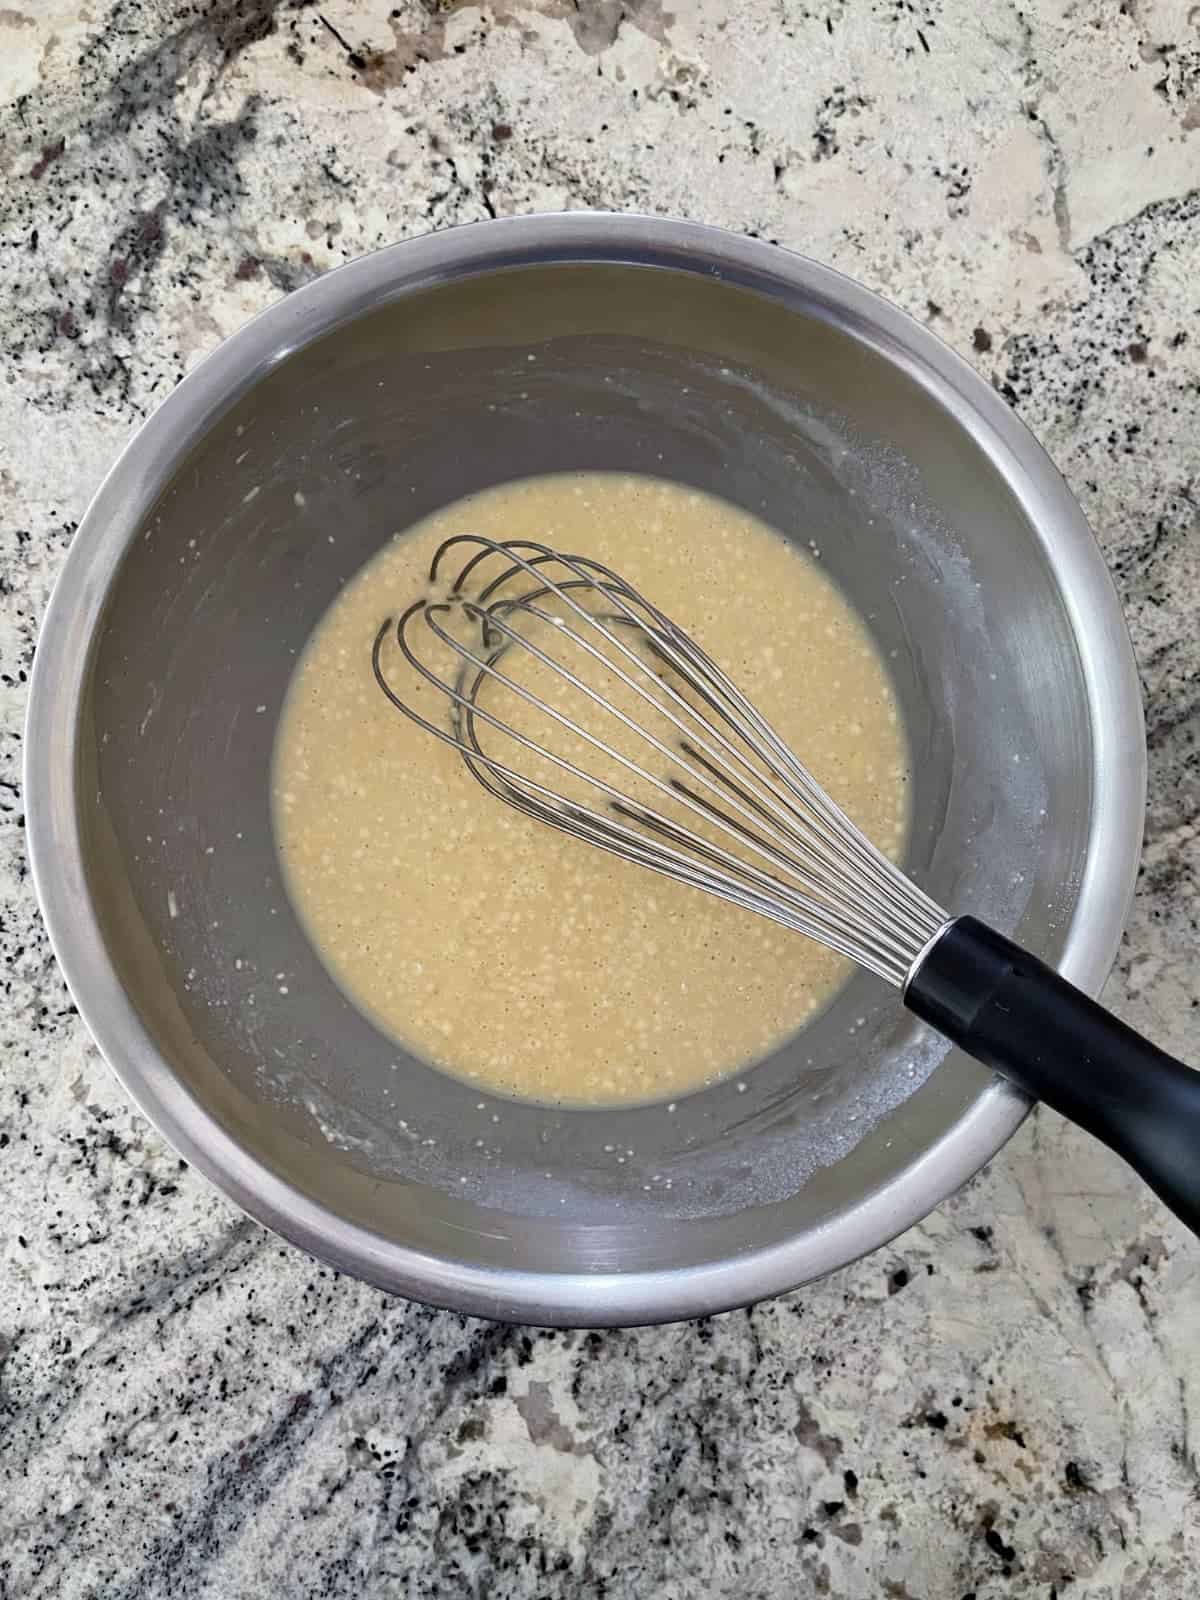 Whisking Bisquick baking mix, milk, eggs, salt and pepper in mixing bowl on granite counter.